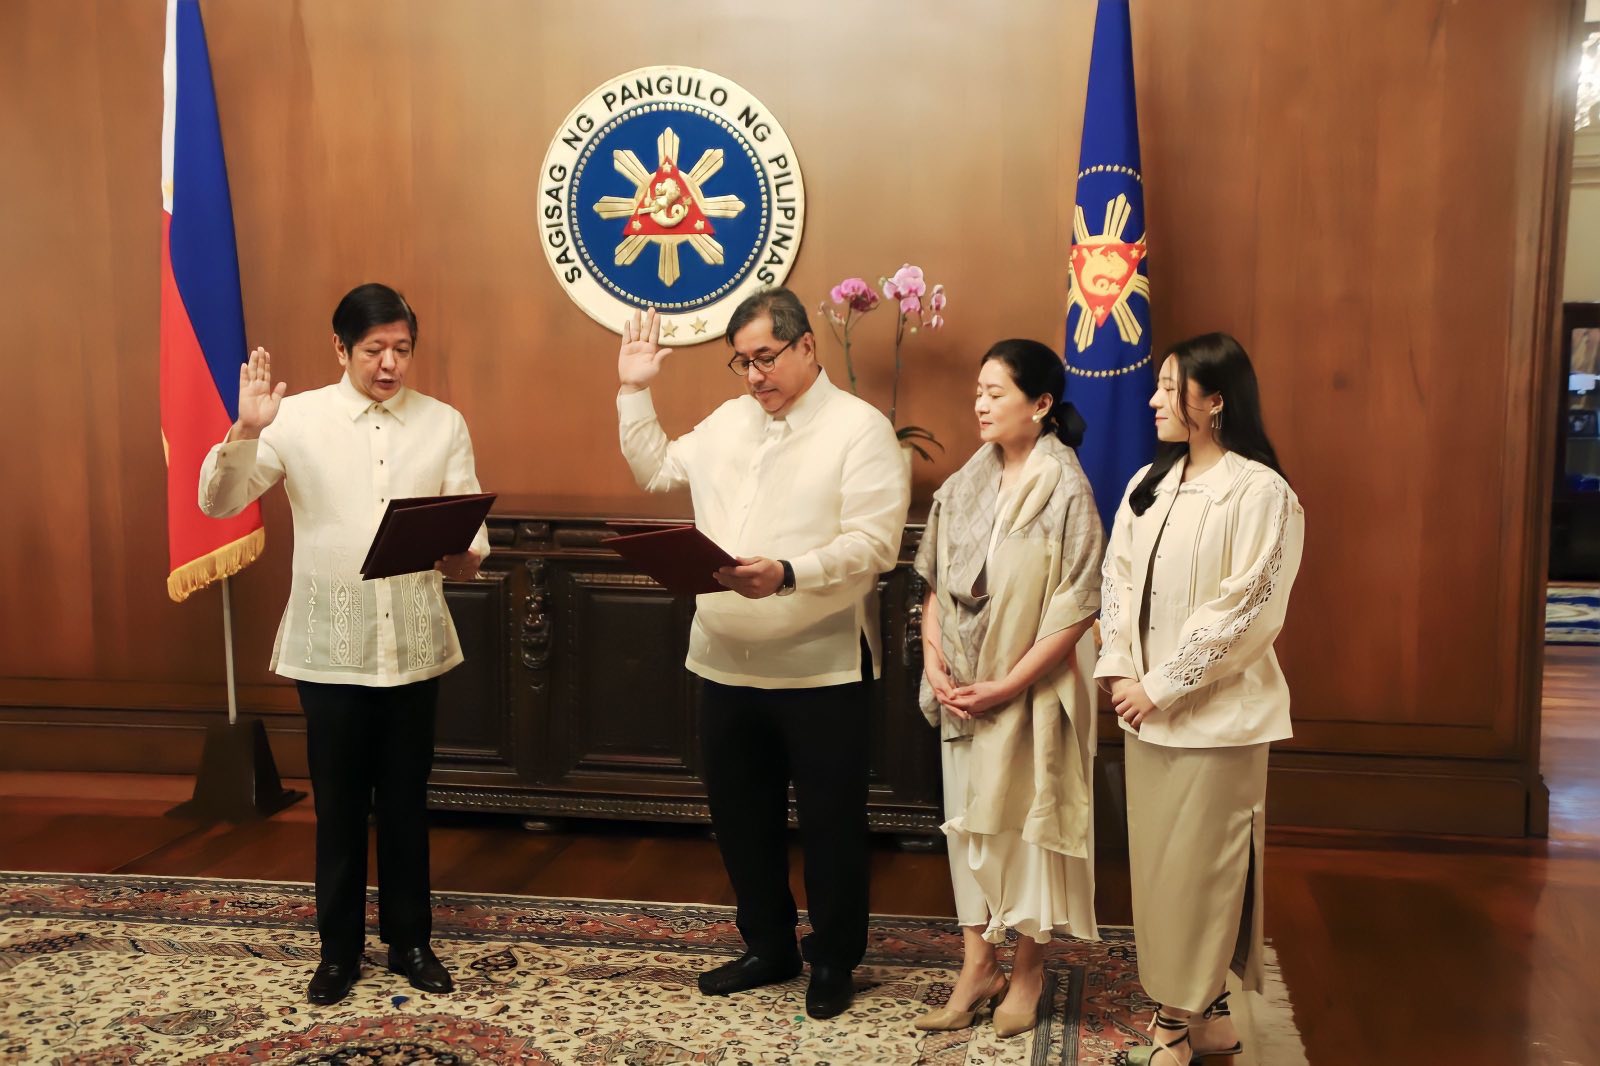 Ted Herbosa takes oath as new health secretary Inquirer News